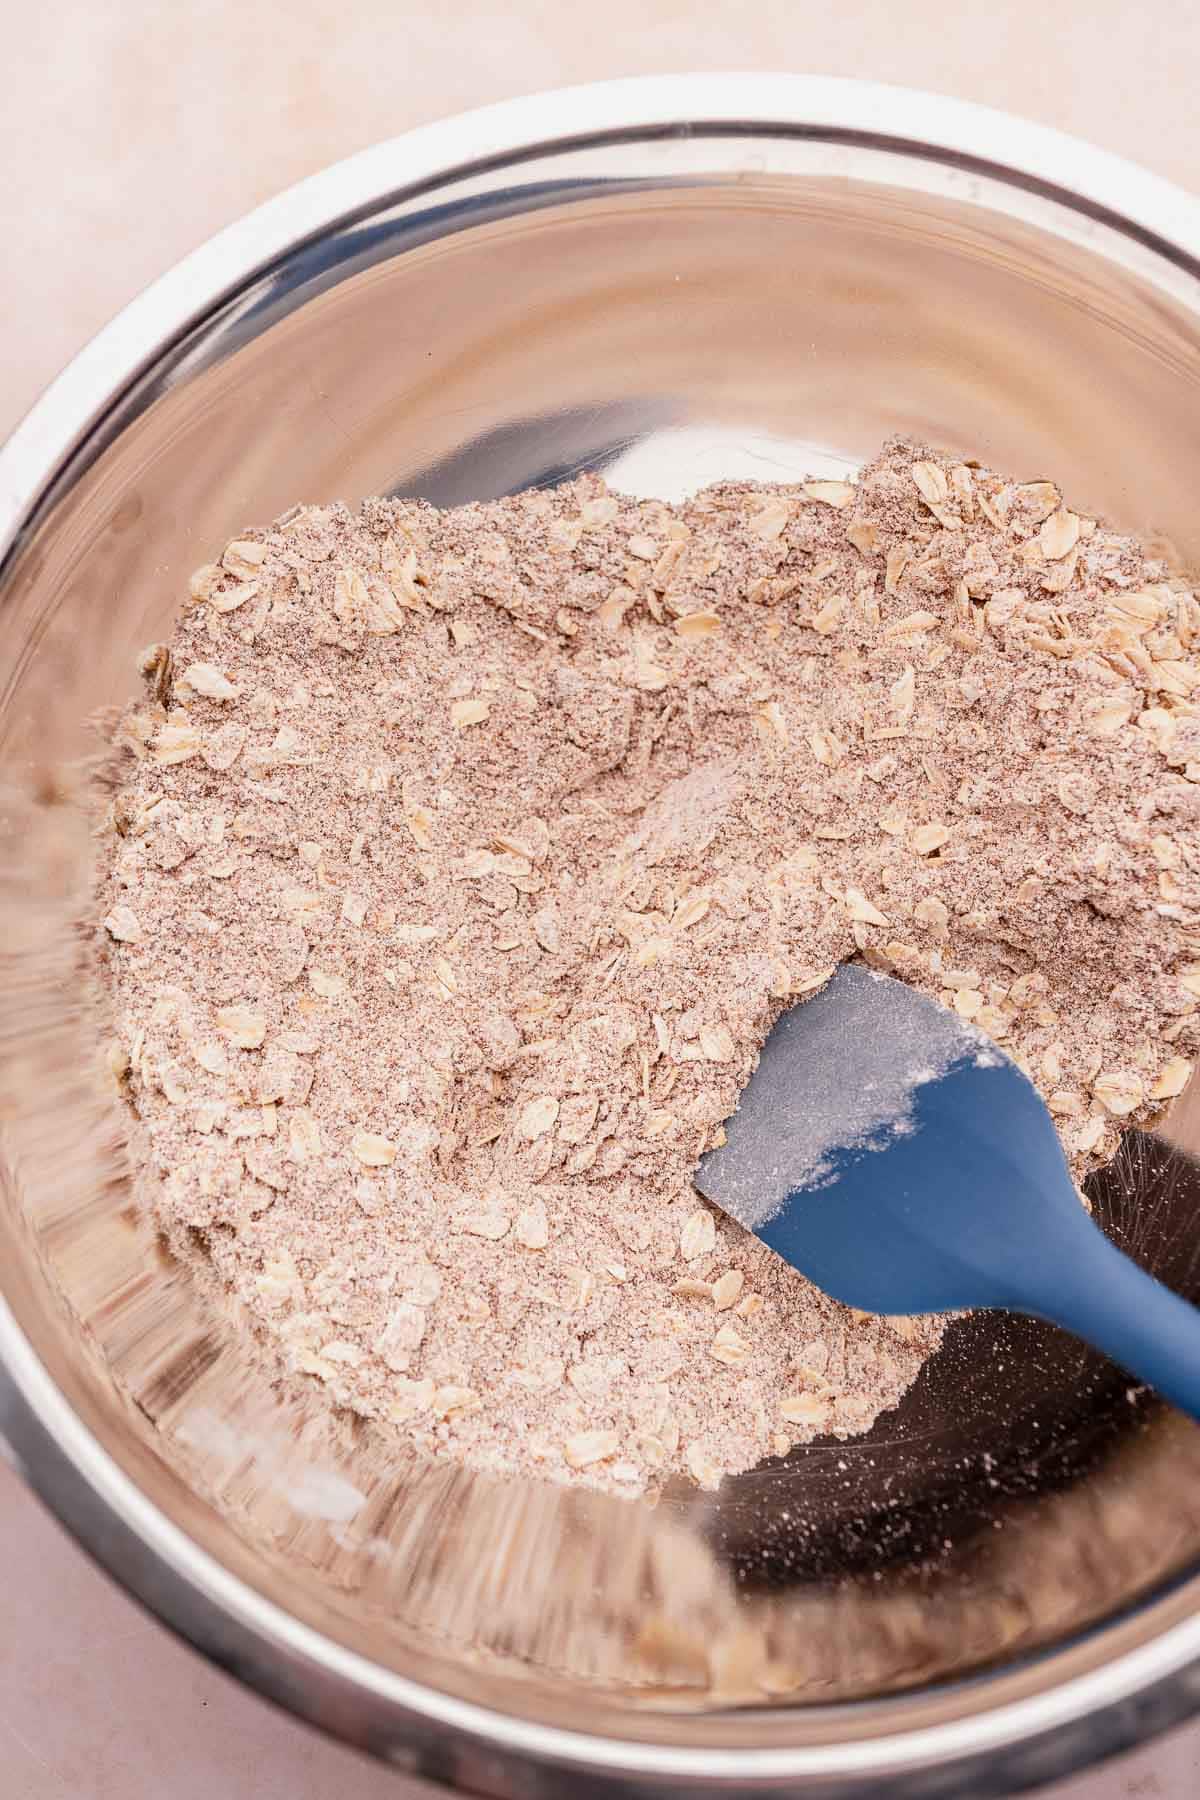 Gluten-free oats in a bowl with a blue spatula.